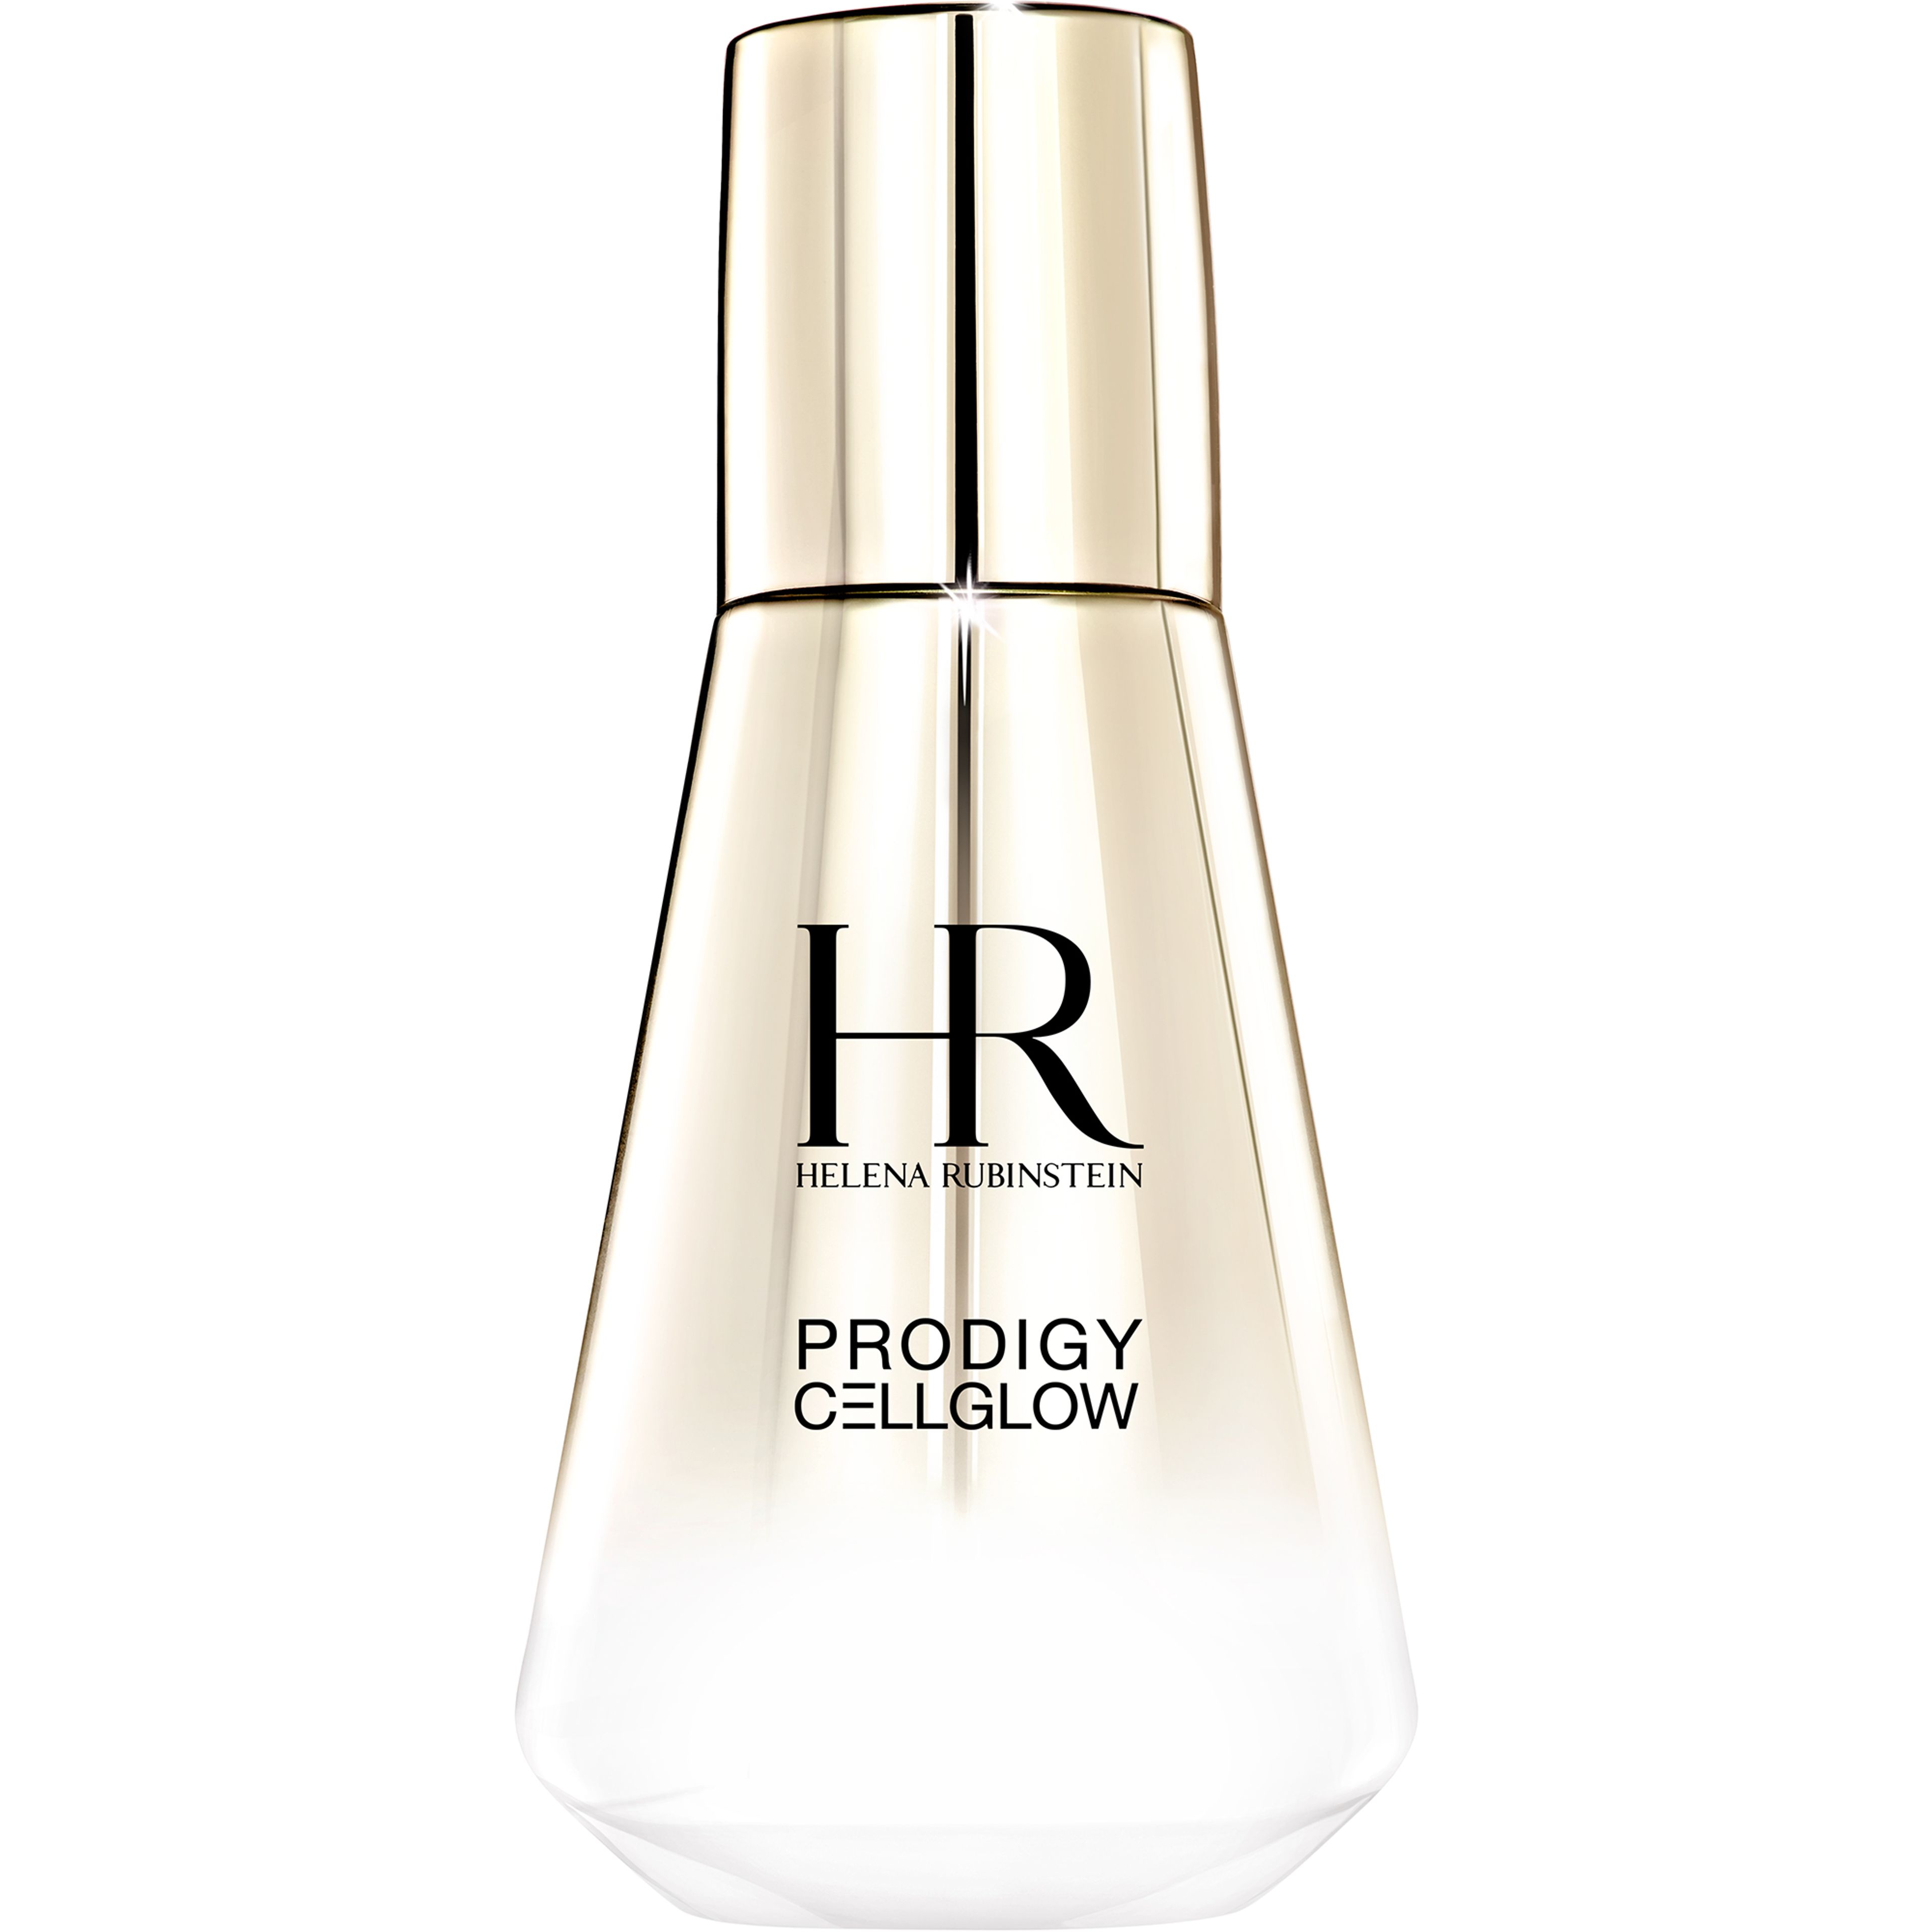 Helena Rubinstein Prodigy Cellglow - The Deep Renewing Concentrate 1